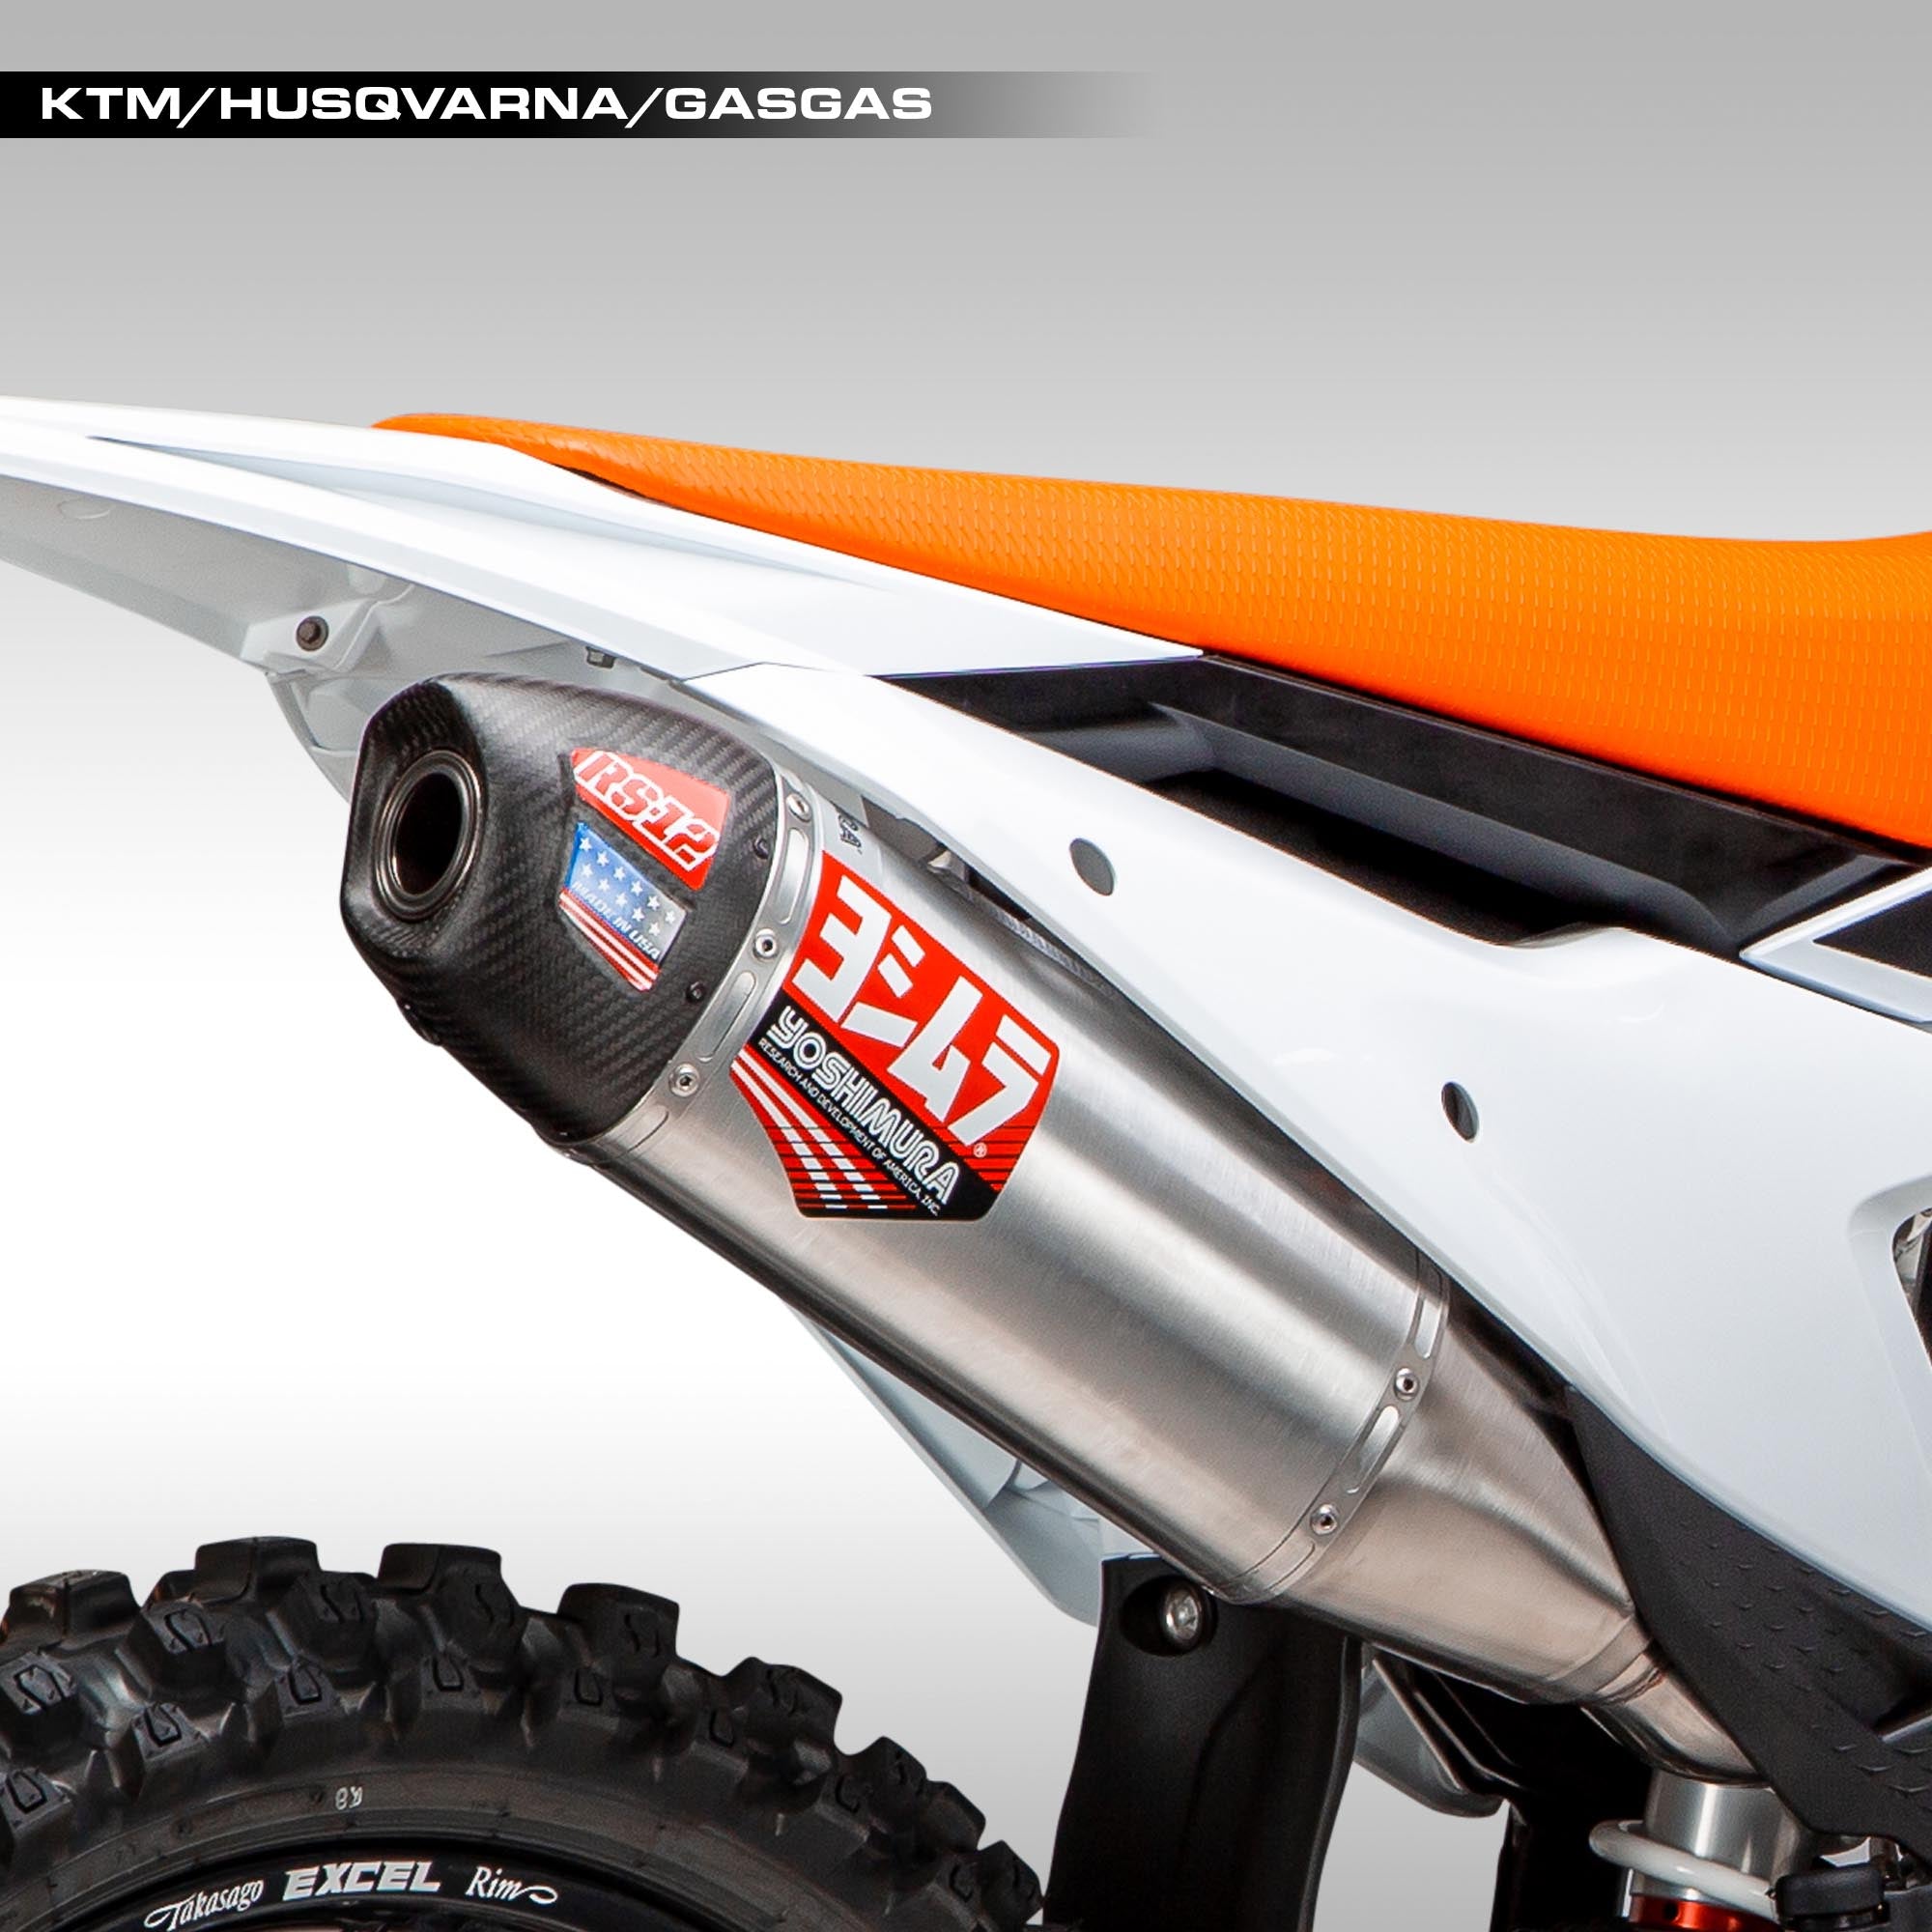 The Yoshimura RS-12 Slip-On Signature Series RS-12 slip-on provides additional power and it increases the torque for you KTM XC-F, SX-F or Husqvarna FX, FC. Includes a USFS approved spark arrestor in every slip-on, giving you peace of mind when you're headed out to the woods. With the SA-19-K spark arrestor, your bike will be noticeably quieter, and when you're out in the backcountry, everyone can appreciate a lower lower noise signature.